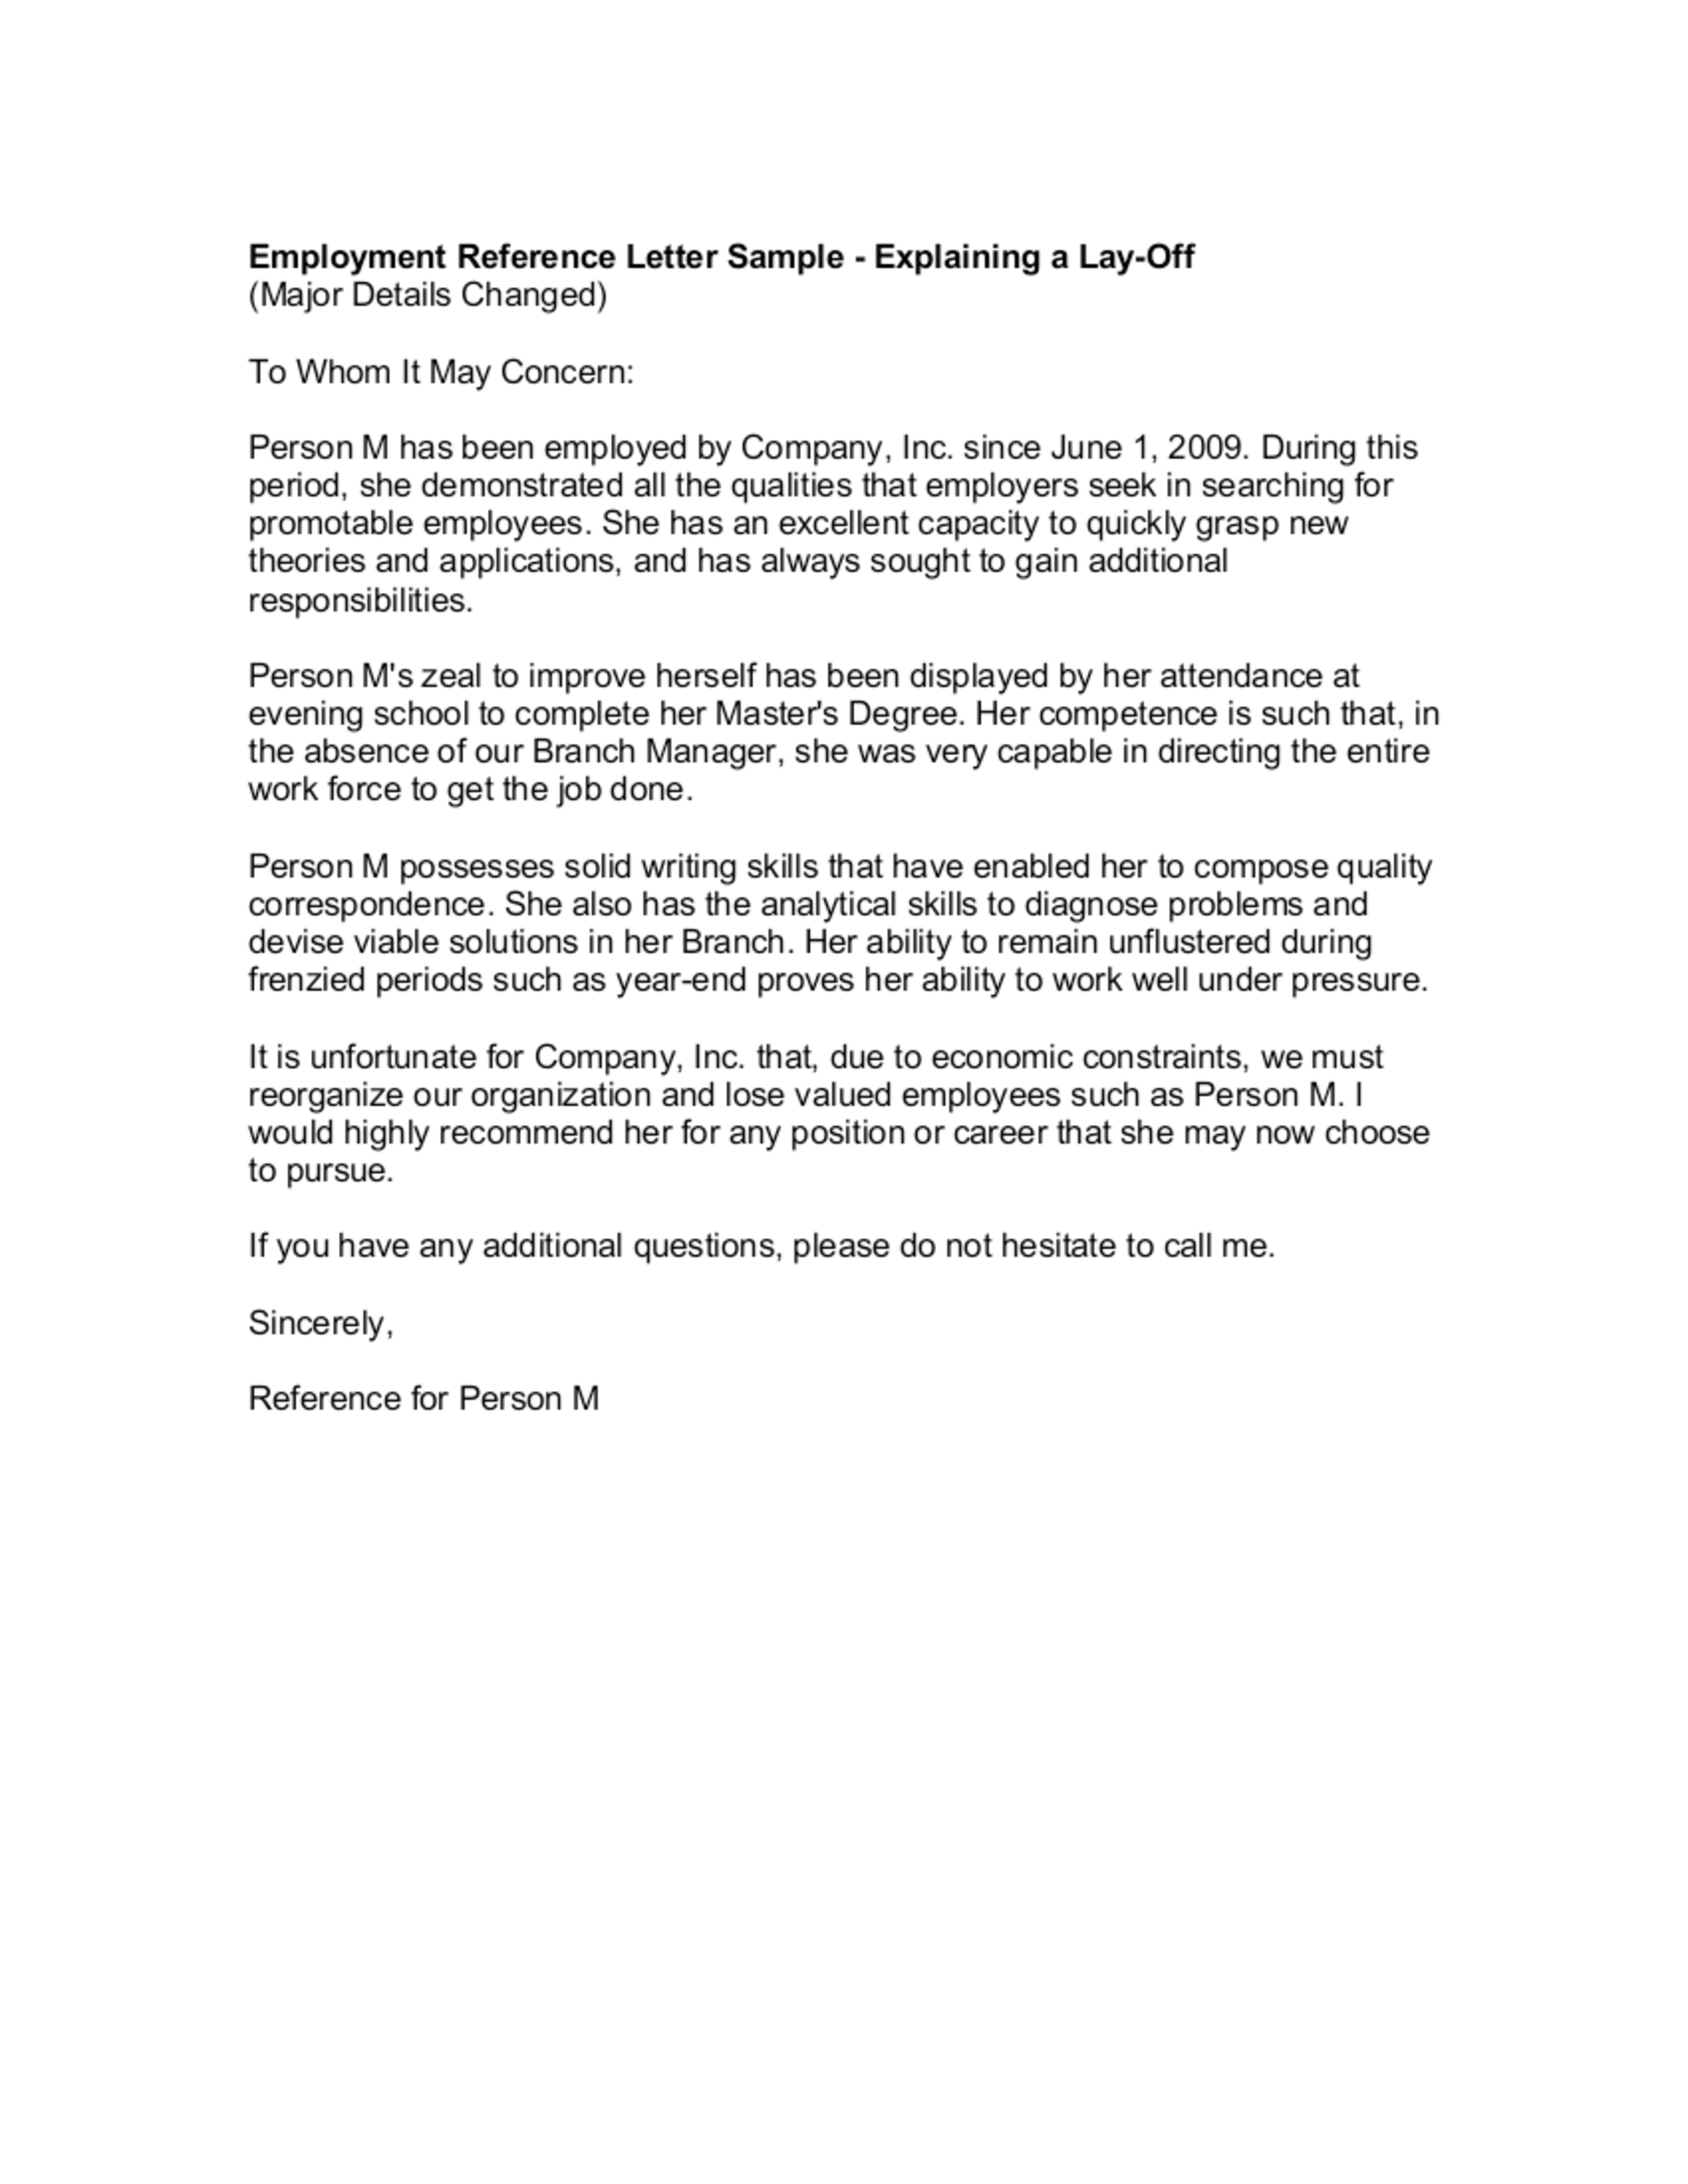 letter of recommendation template business